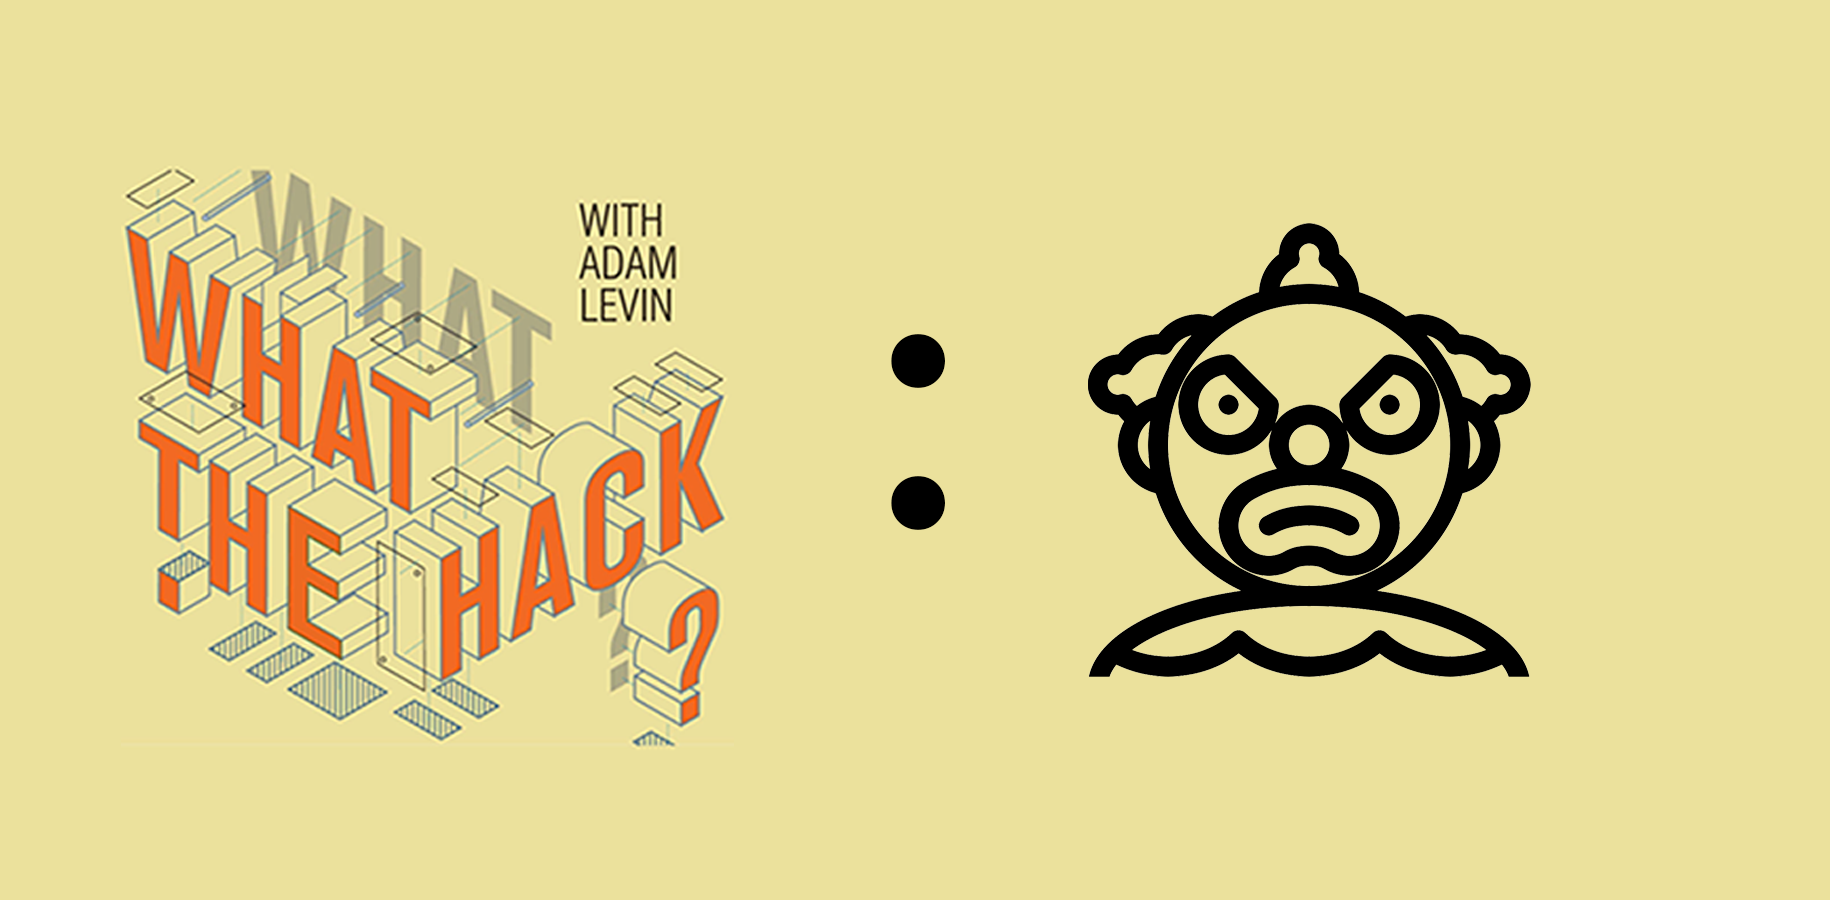 WHat the Hack with Adam Levin